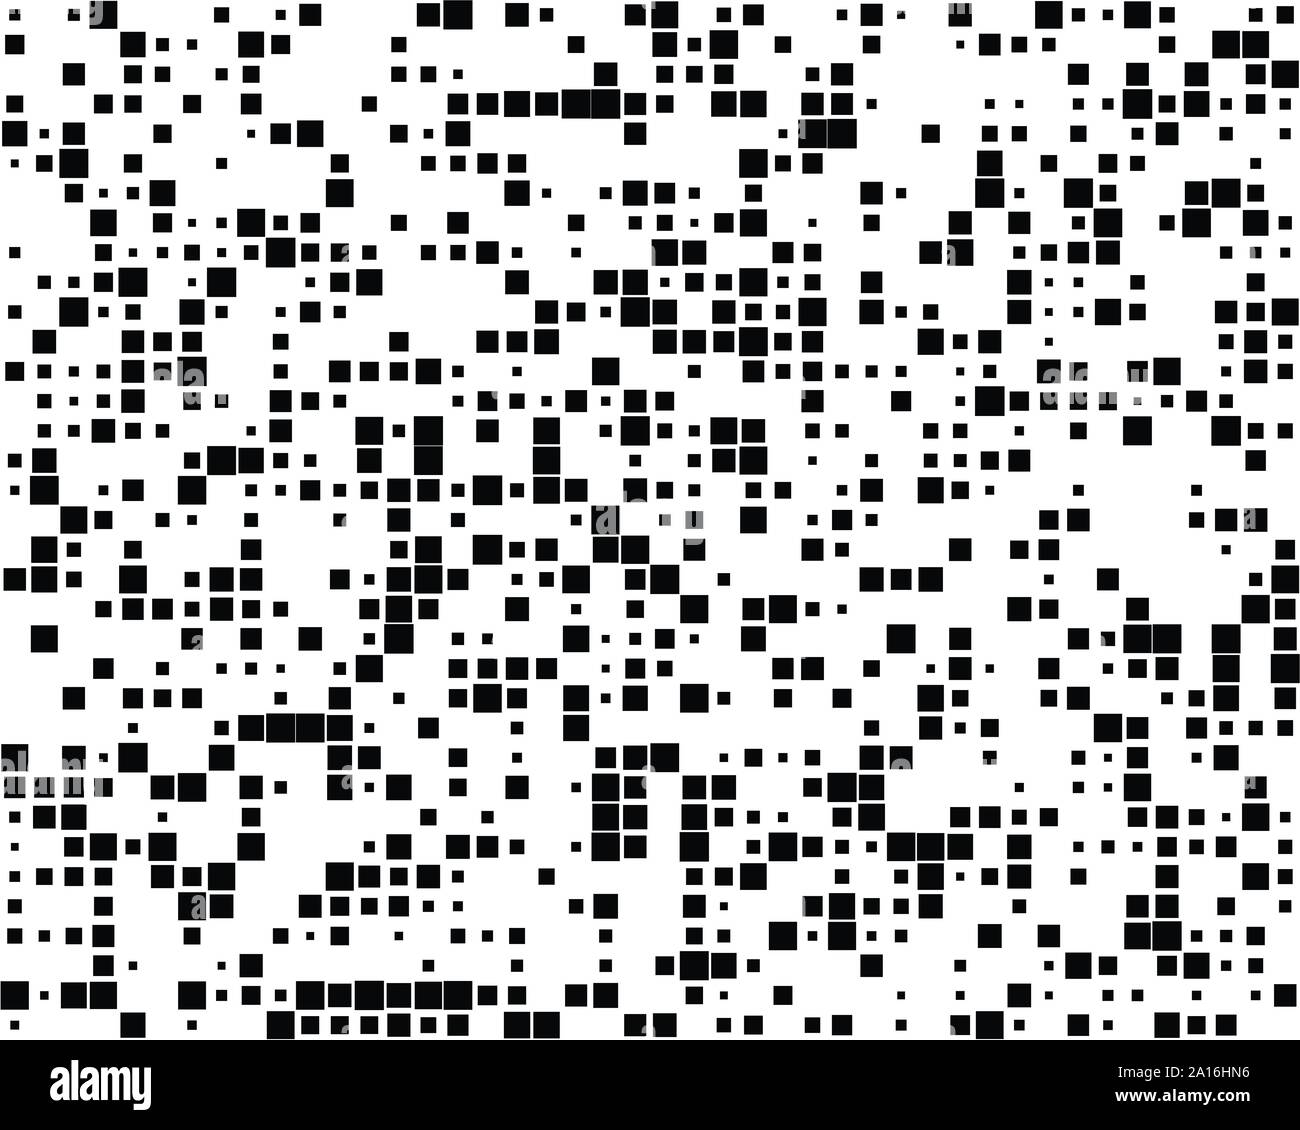 squares pixelated, block pixels random mosaic pattern / background. fusion checkered grid, mesh. shuffle, diffuse scatter squares. clutter matrix. geo Stock Vector